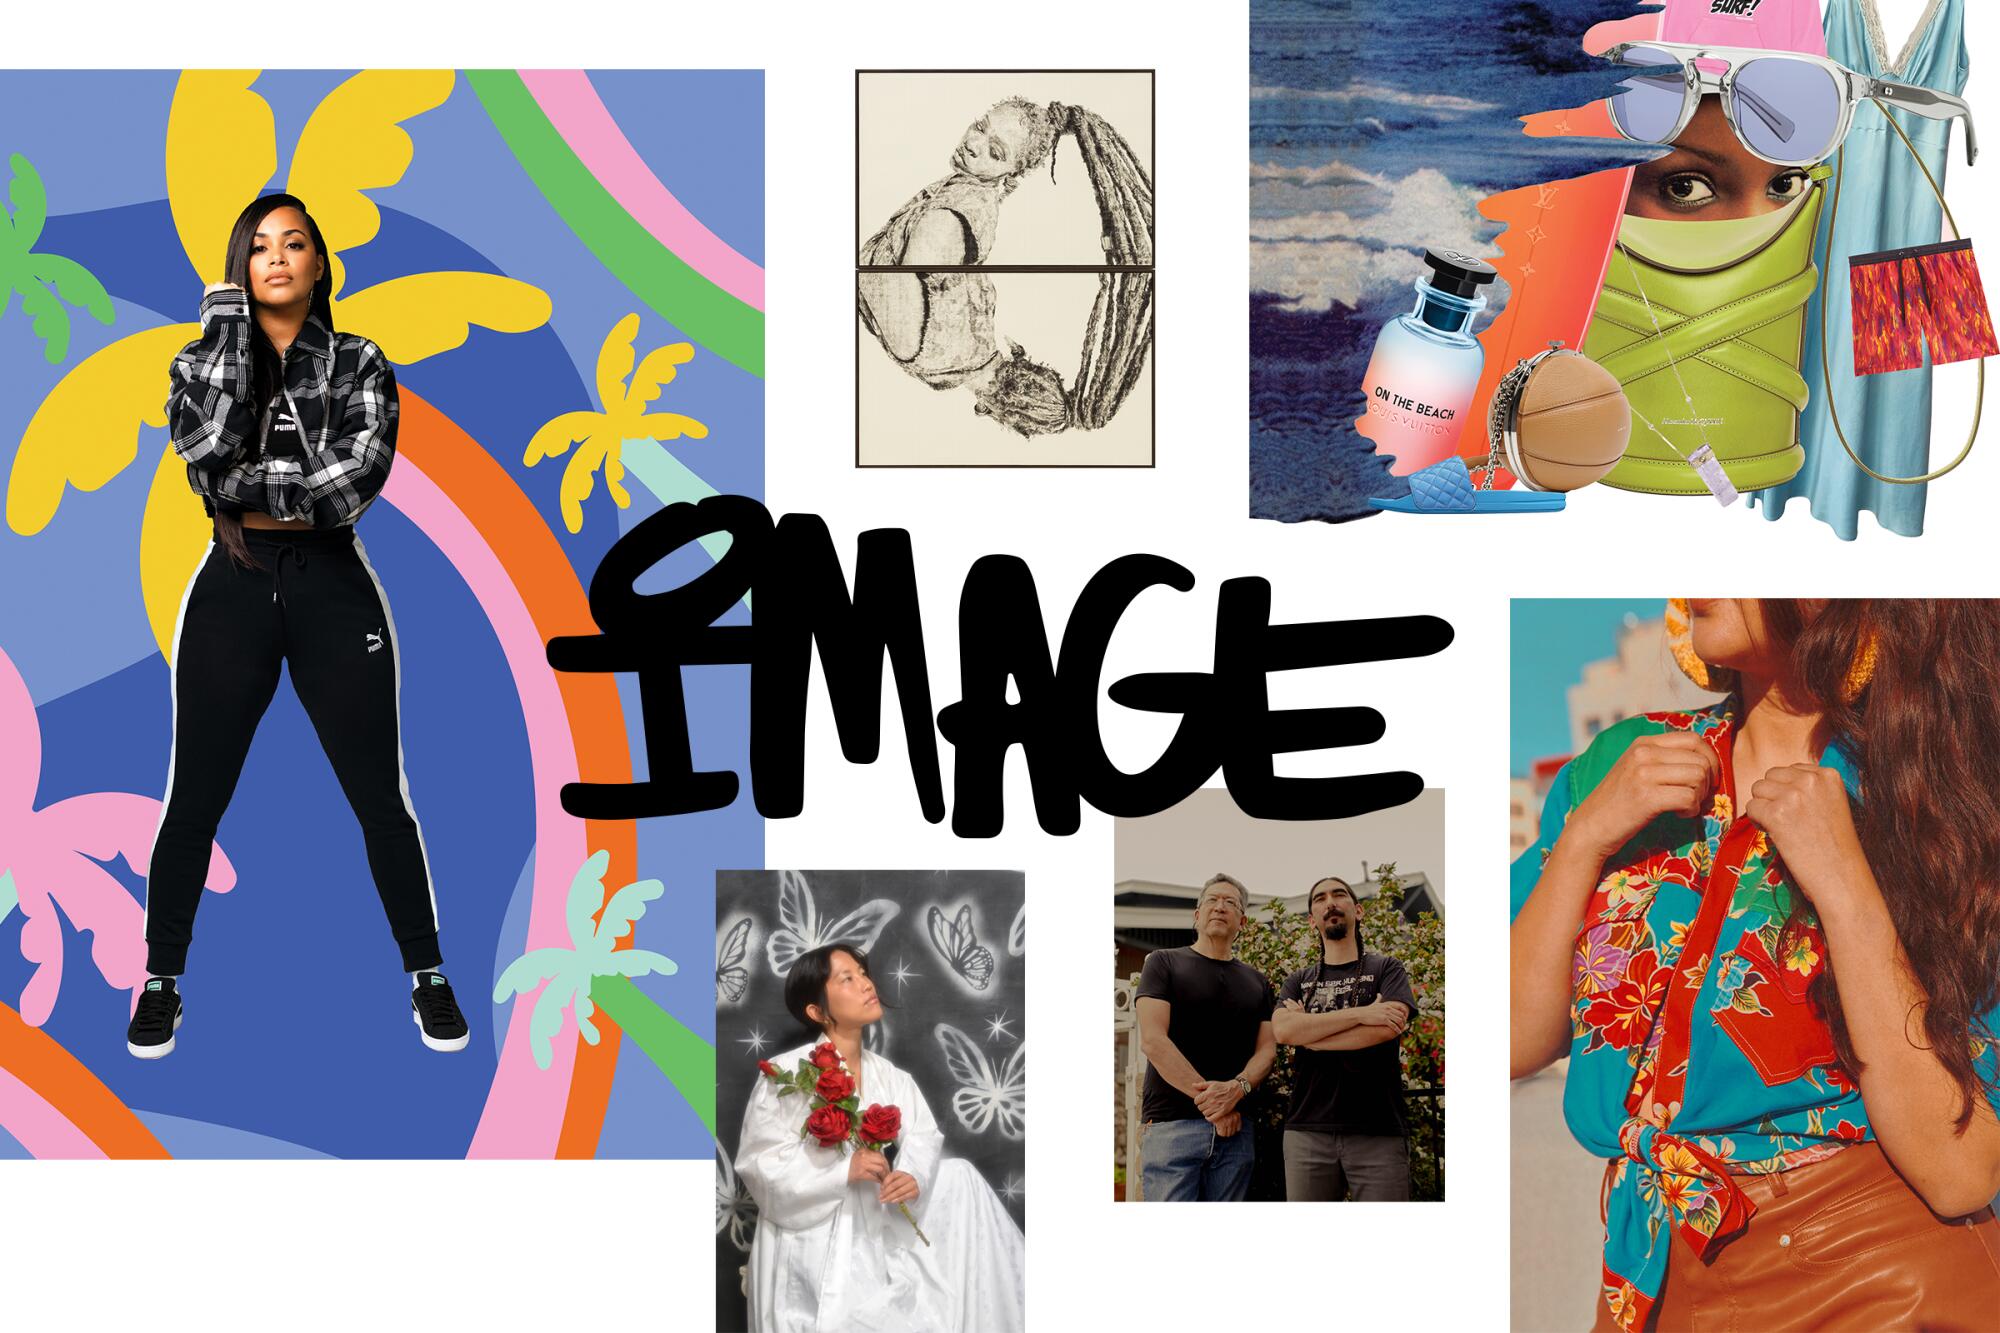 collage of Image Issue 2 photos and art with the Issue 2 logo in the center